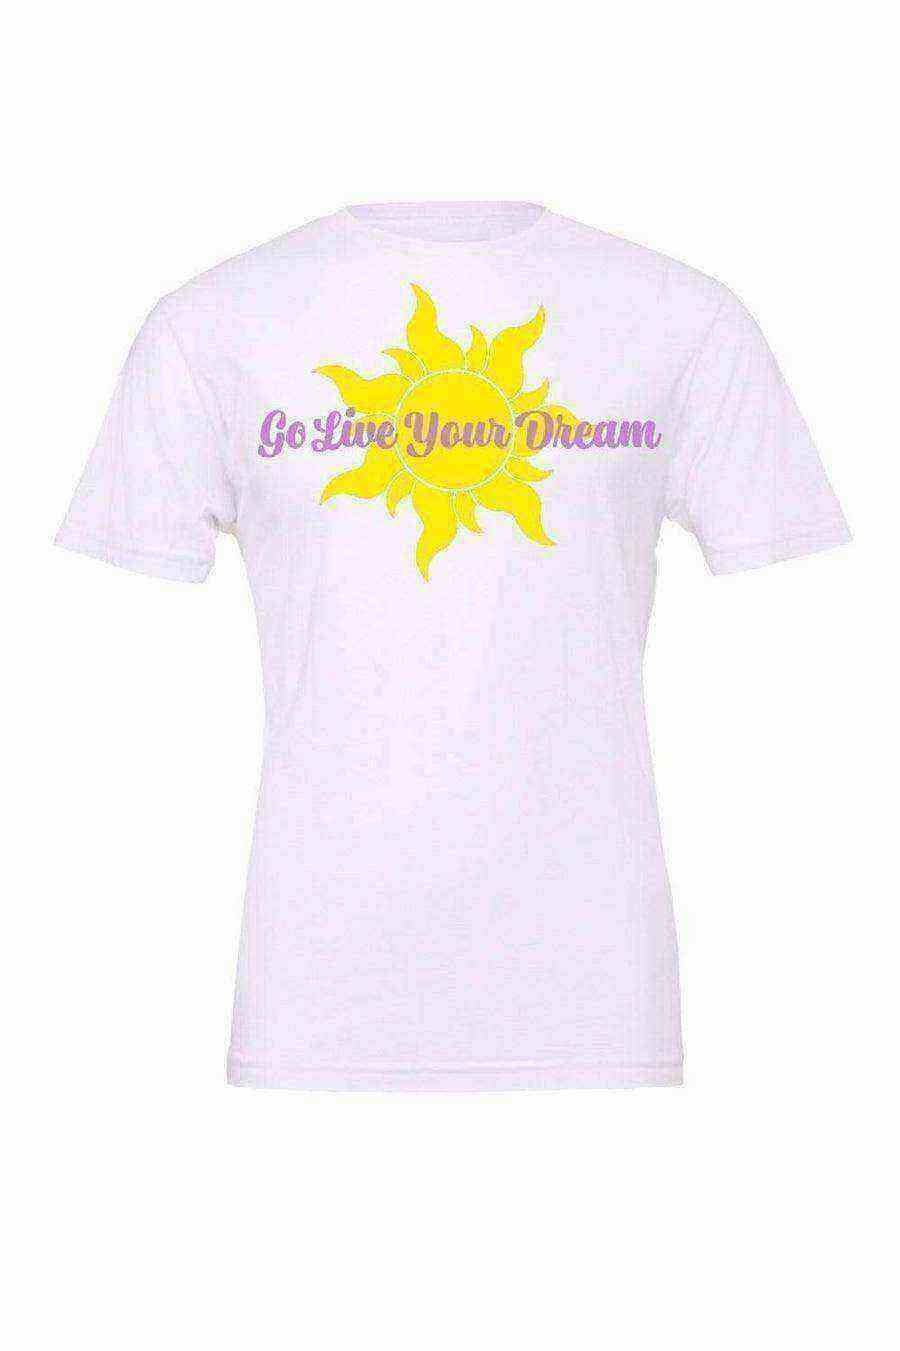 Go Live Your Dream - Dylan's Tees